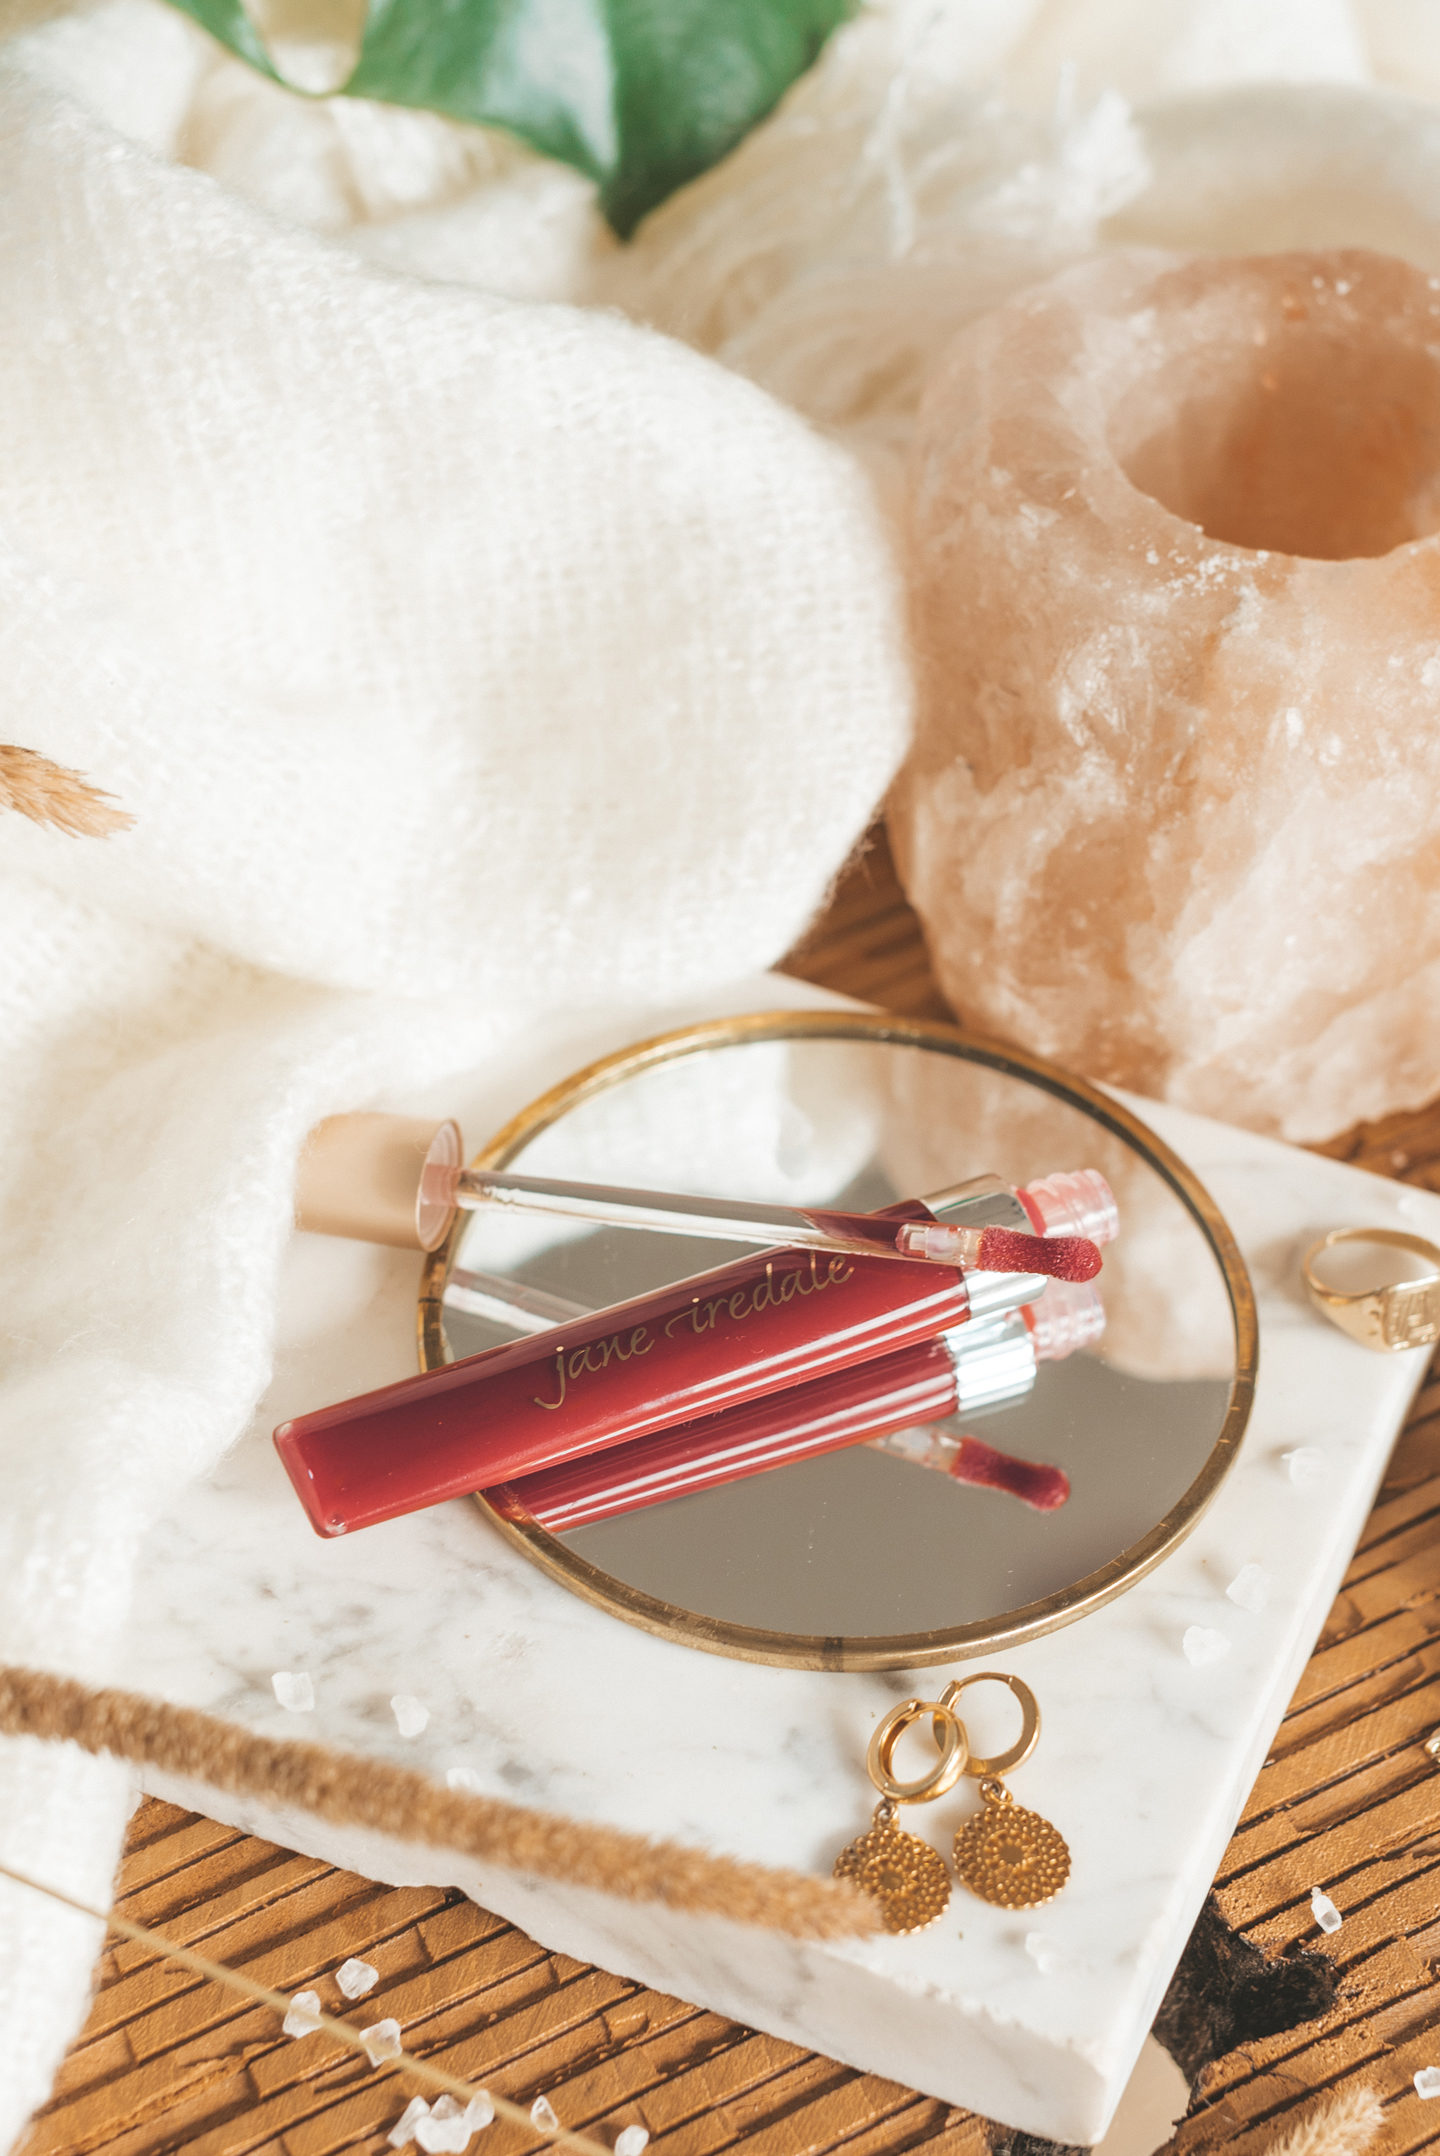  Shades for Fall-collectie jane iredale herfstcollectie 2018